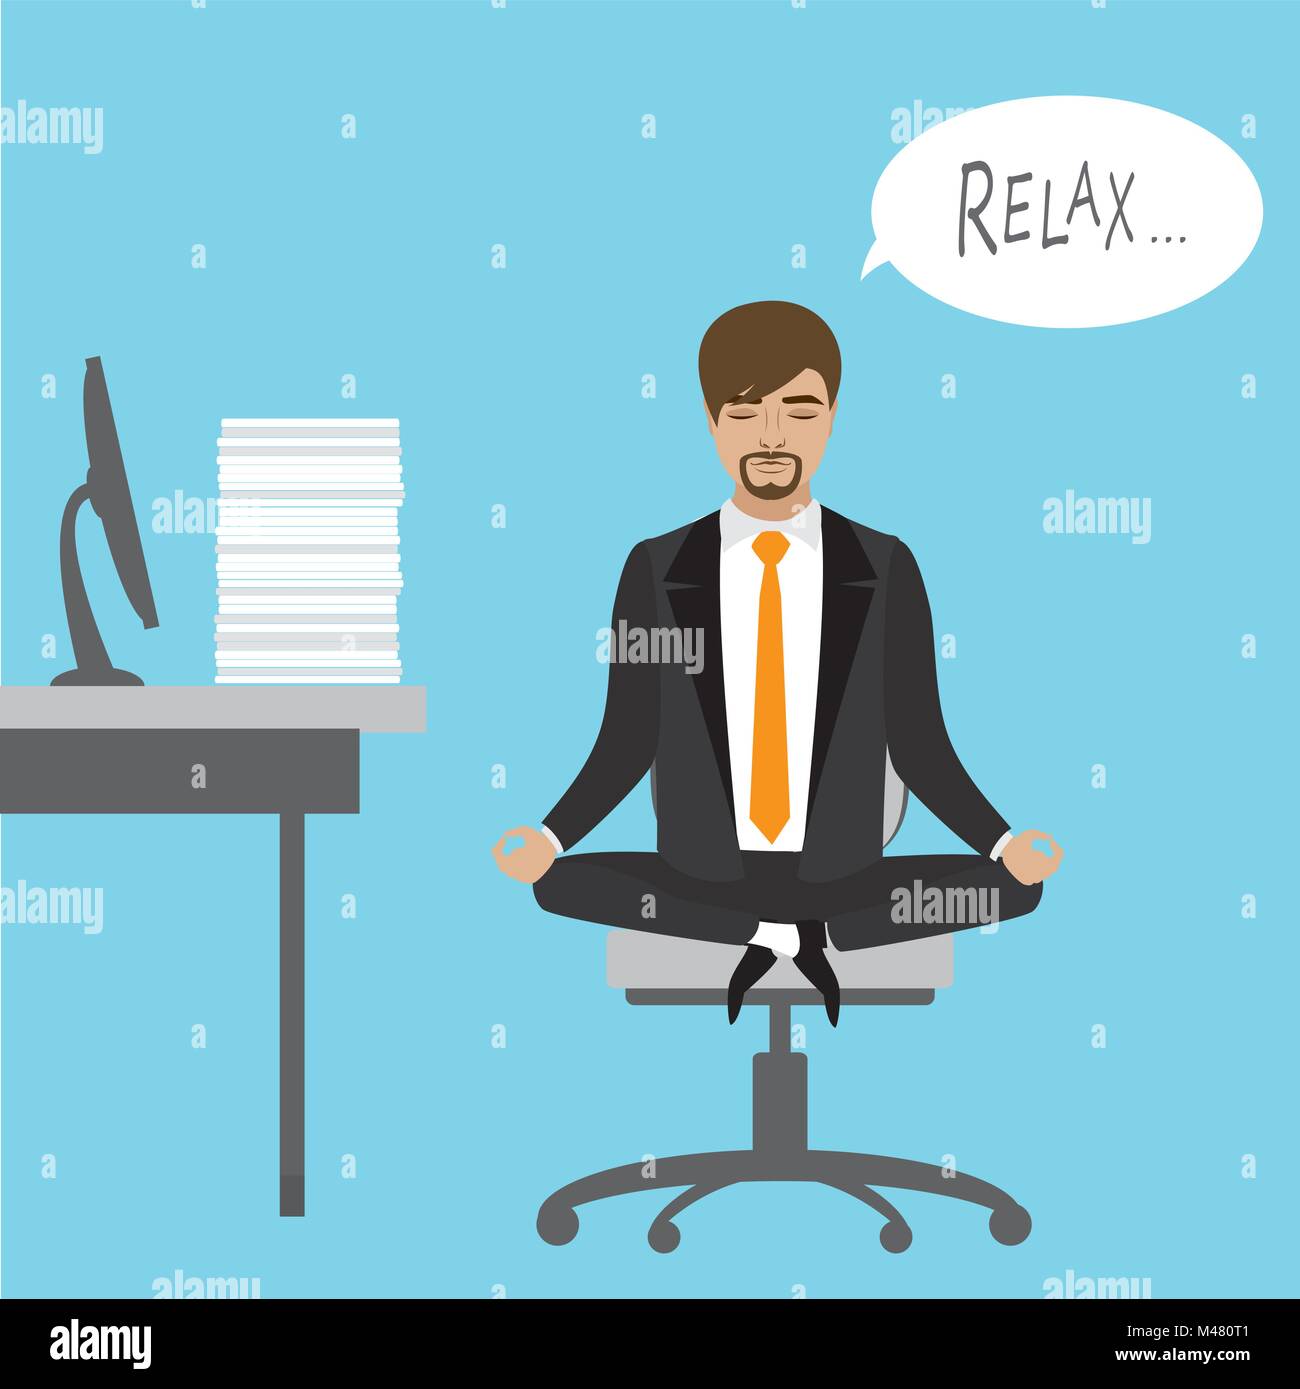 Office worker relaxes and meditates in the lotus position on the job, vector illustration Stock Vector